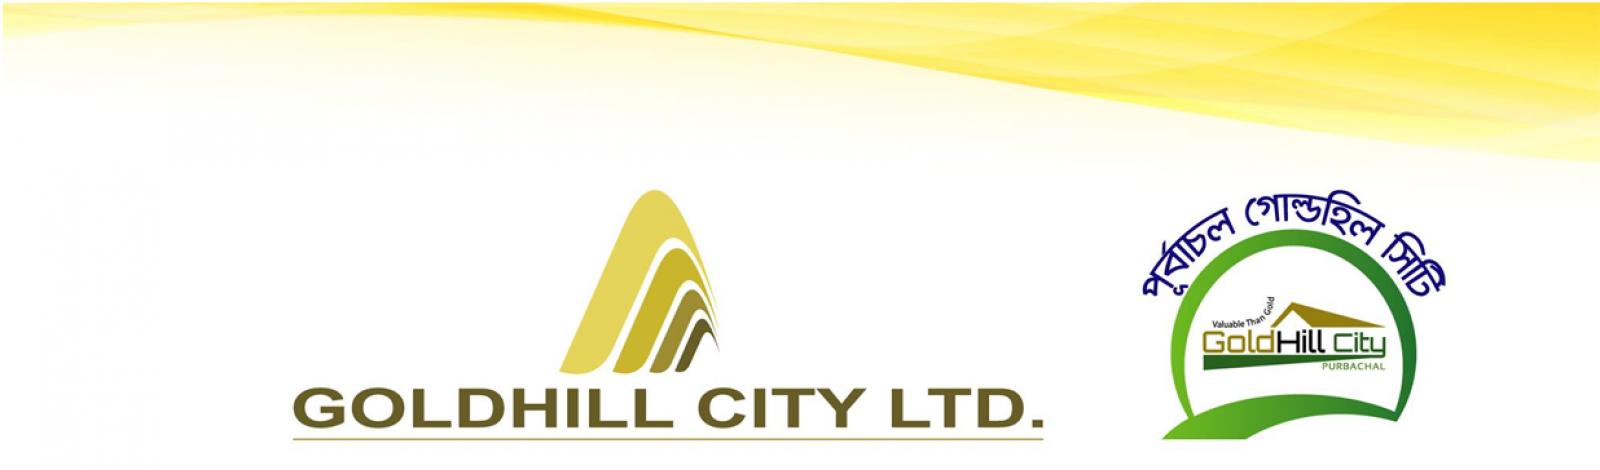 GoldHill City Group banner